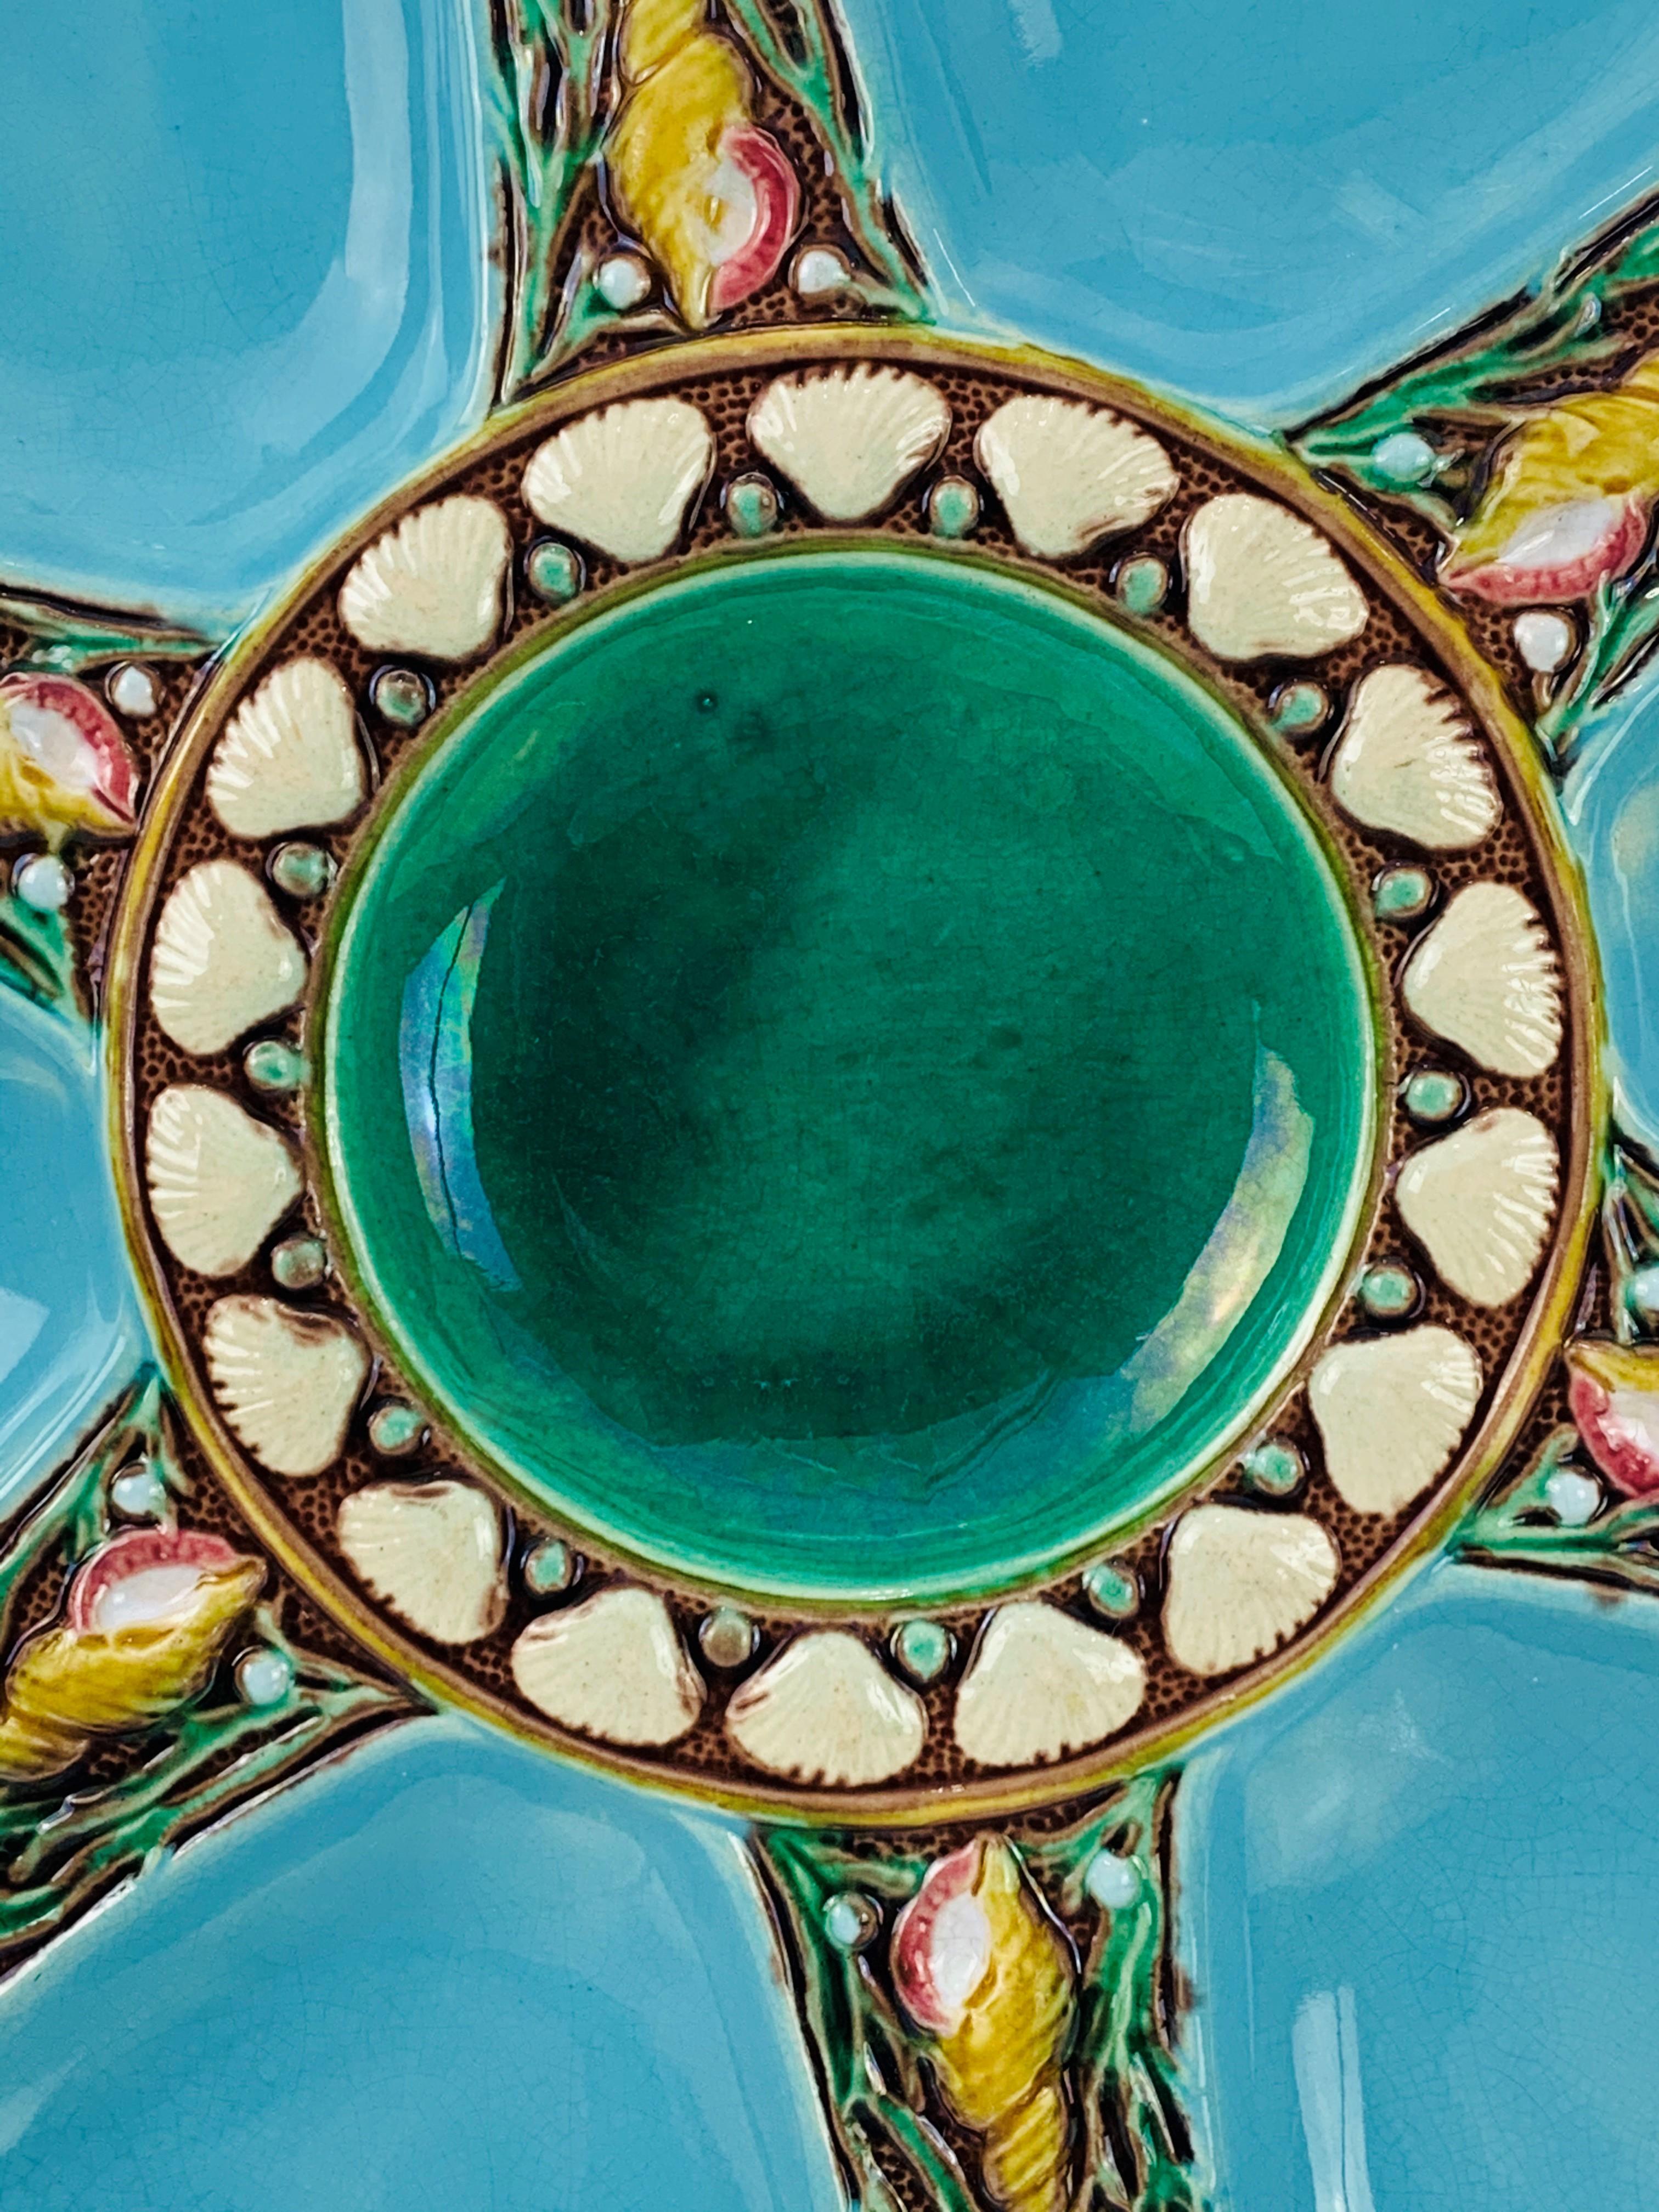 Minton Majolica six well oyster plate, the wells glazed in turquoise blue, each well separated by shells and seaweed, the central well glazed in green, bordered with shells. Impressed marks to reverse: 'Minton' with Minton date cypher for 1873